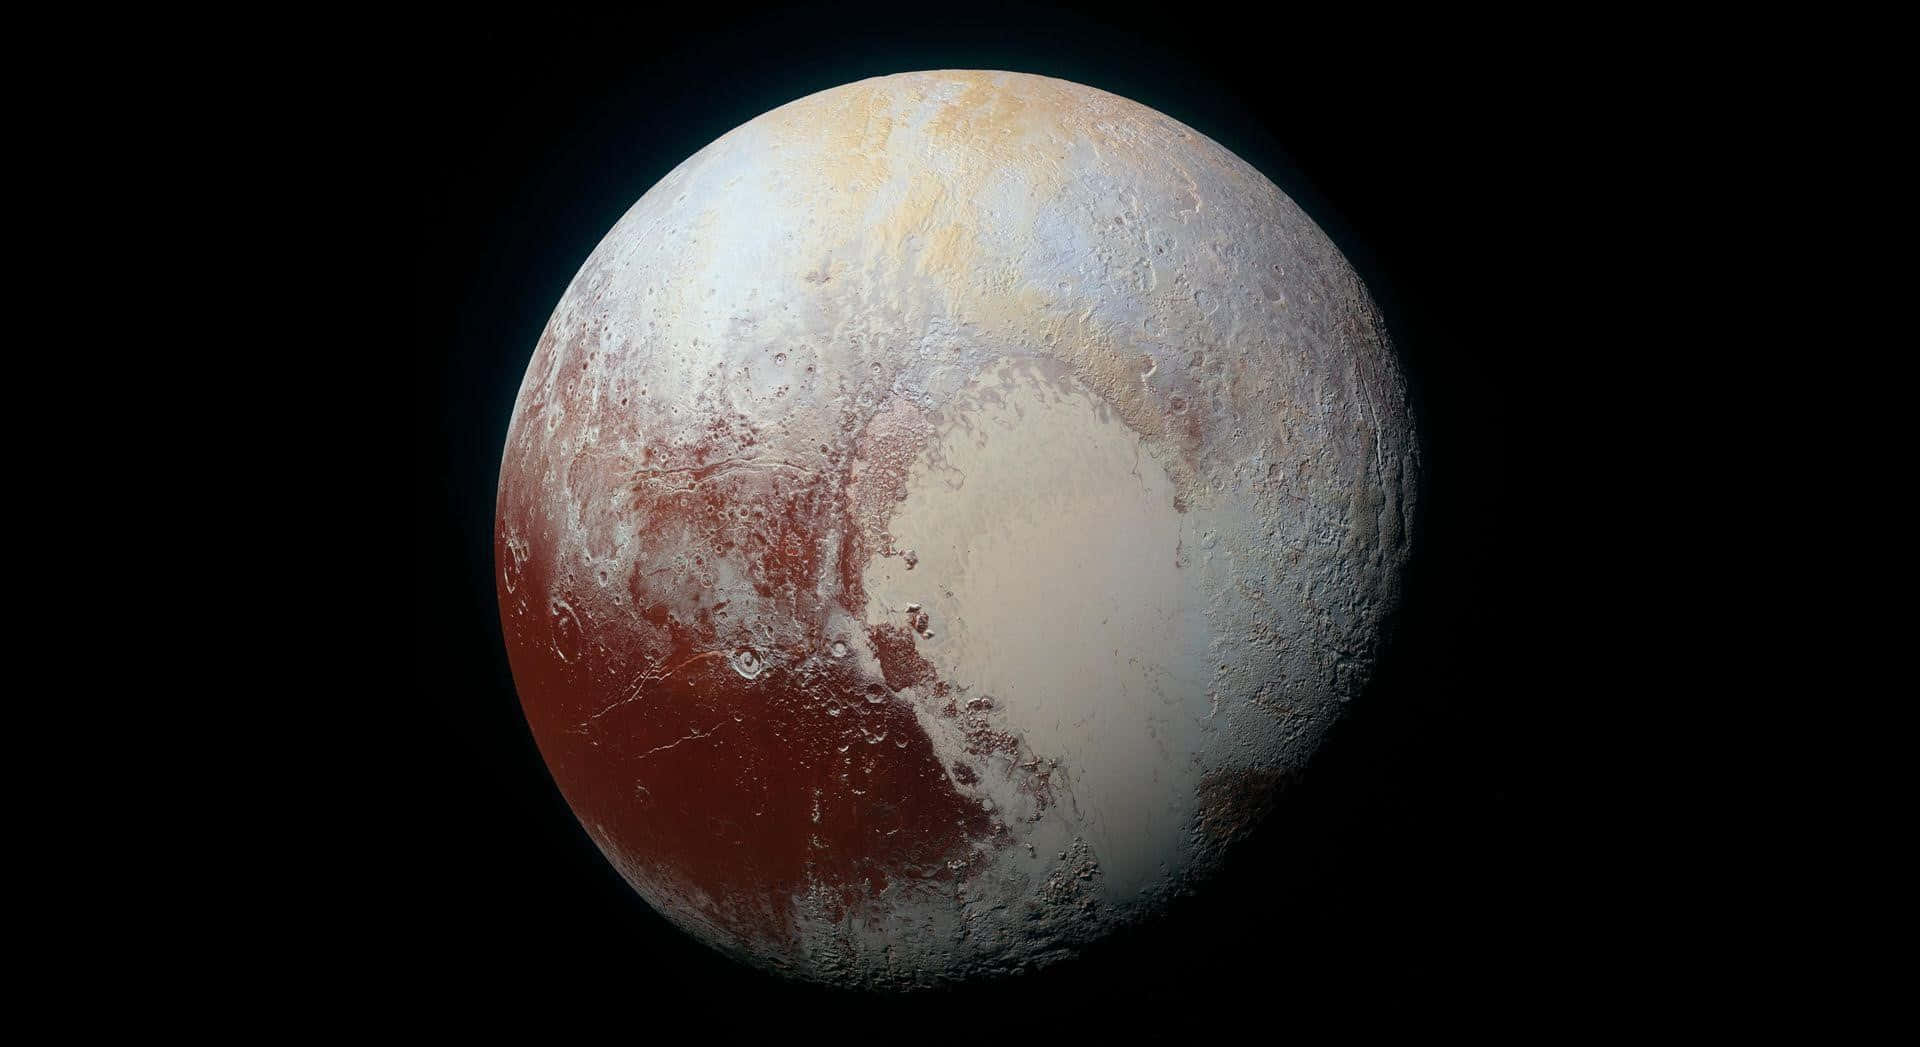 “Mysterious Pluto – A Planet Beyond Our Solar System”